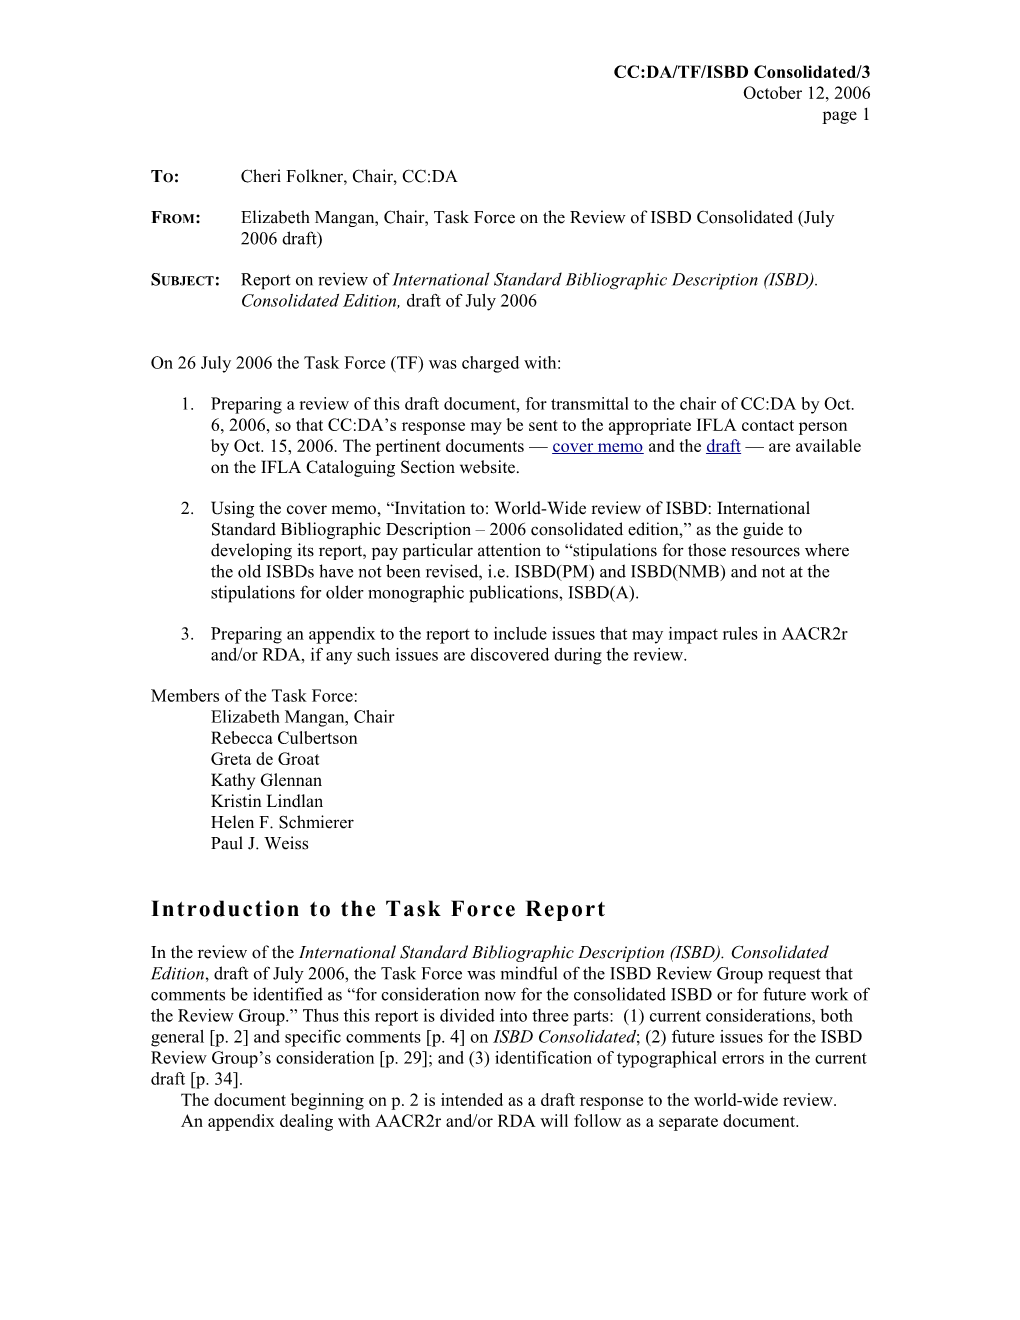 Report of the Task Force on the Review of International Standard Bibliographic Description